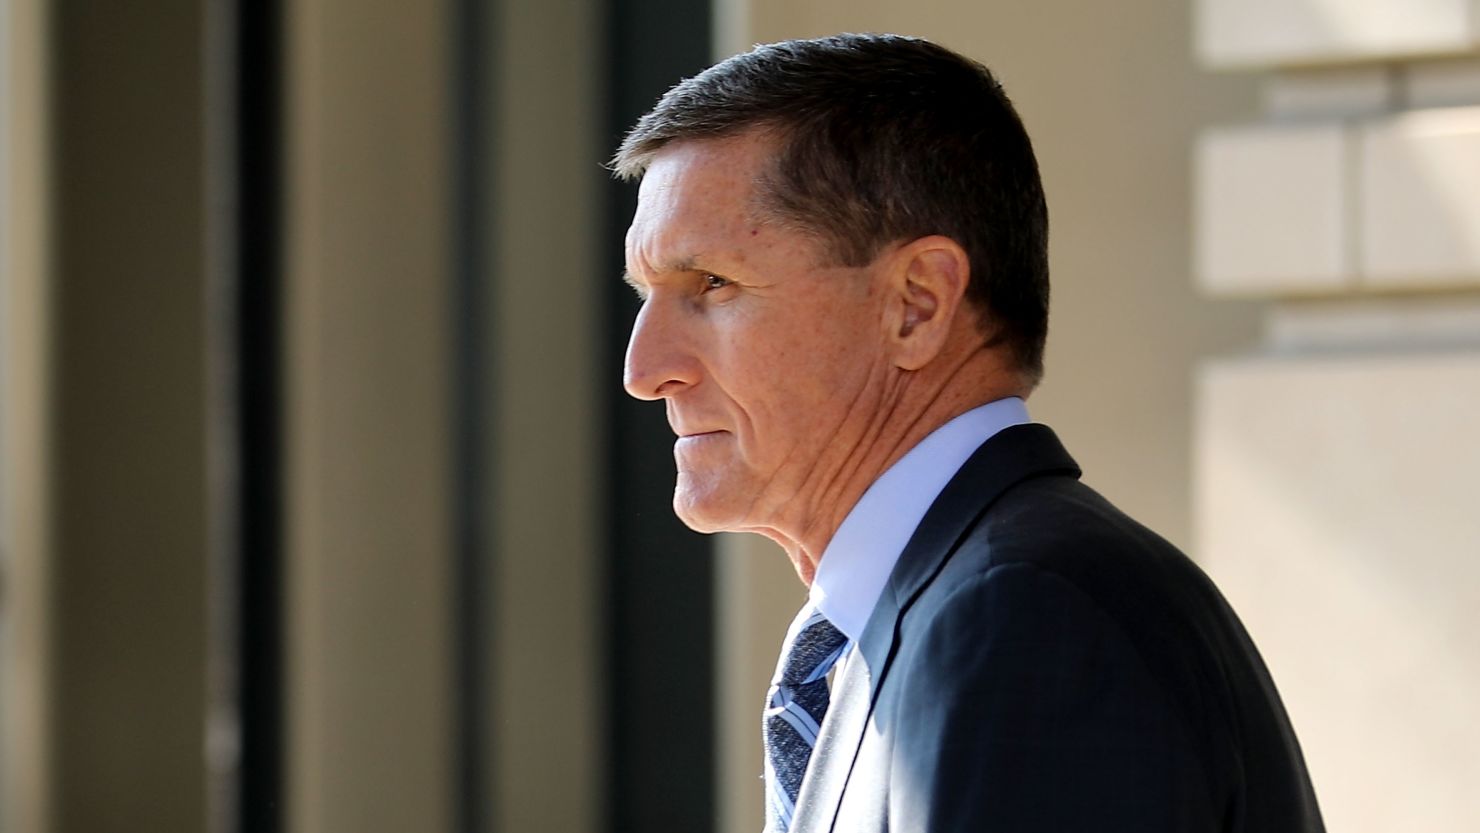 Michael Flynn, former national security adviser to President Donald Trump, leaves following his plea hearing at the Prettyman Federal Courthouse December 1, 2017 in Washington, DC. 